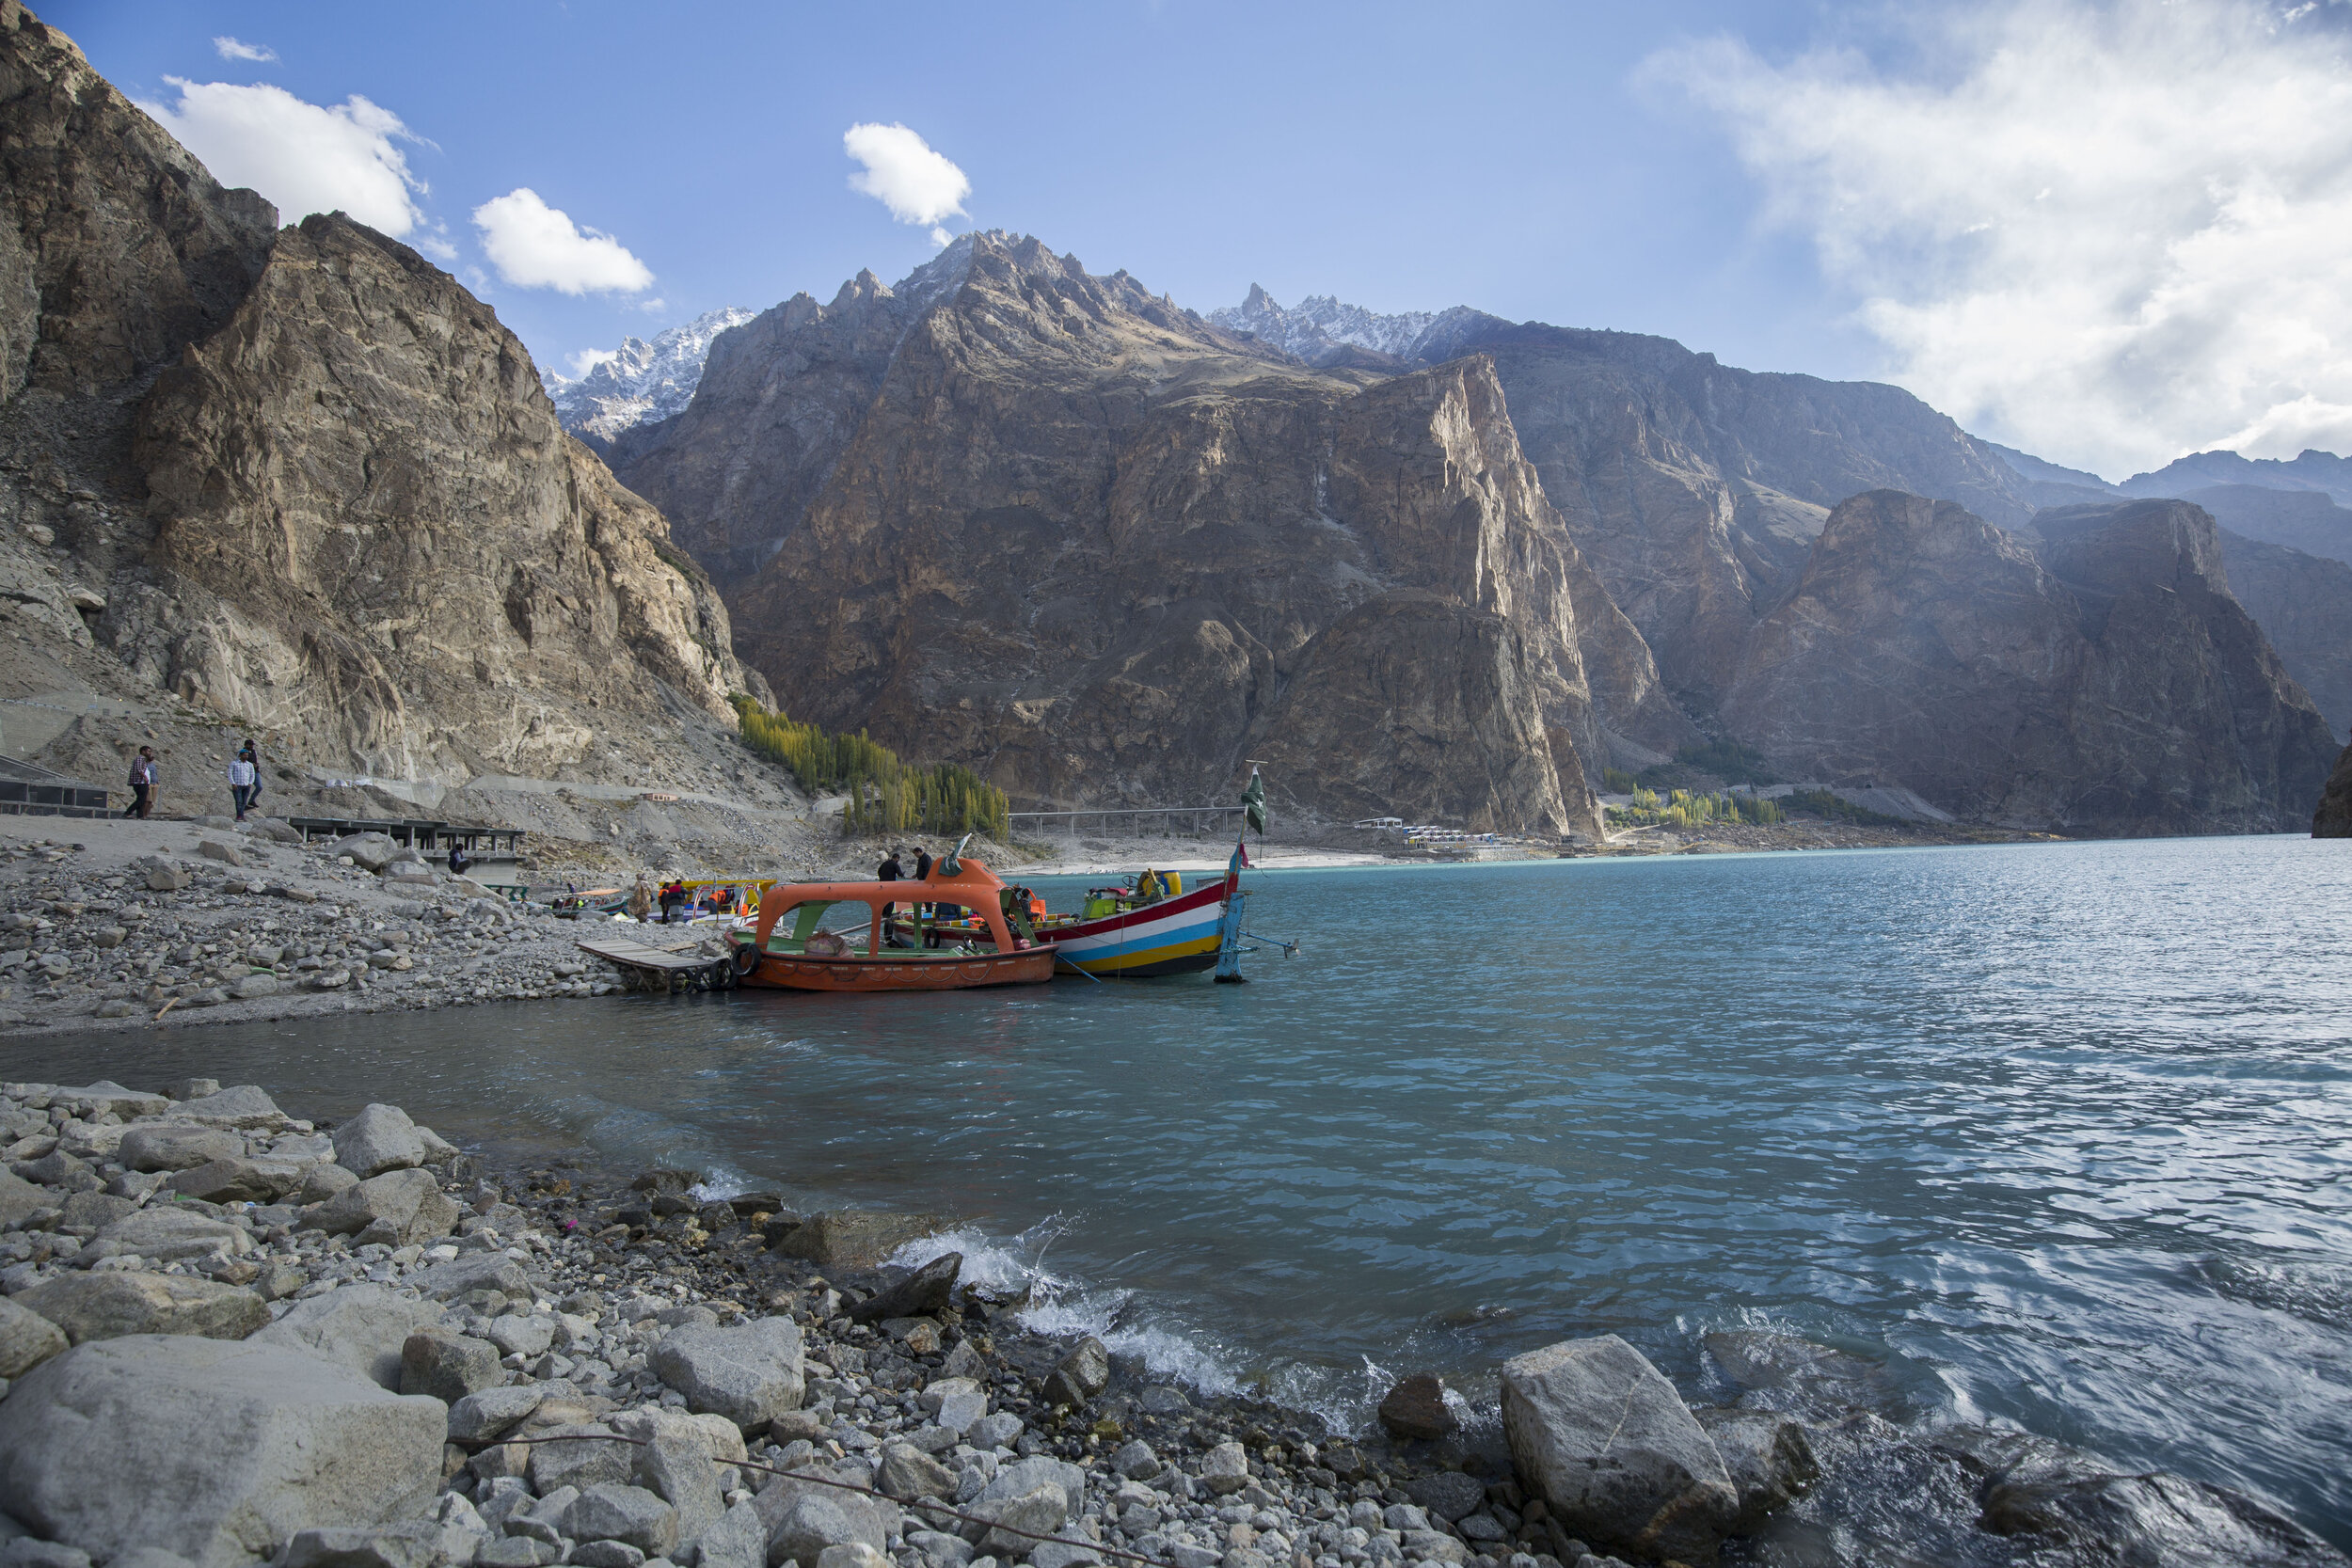  Attabad lake has extremely poor internet access despite being a major tourist attraction. "We have breathtaking views with literally breathtaking internet," a local resident. 